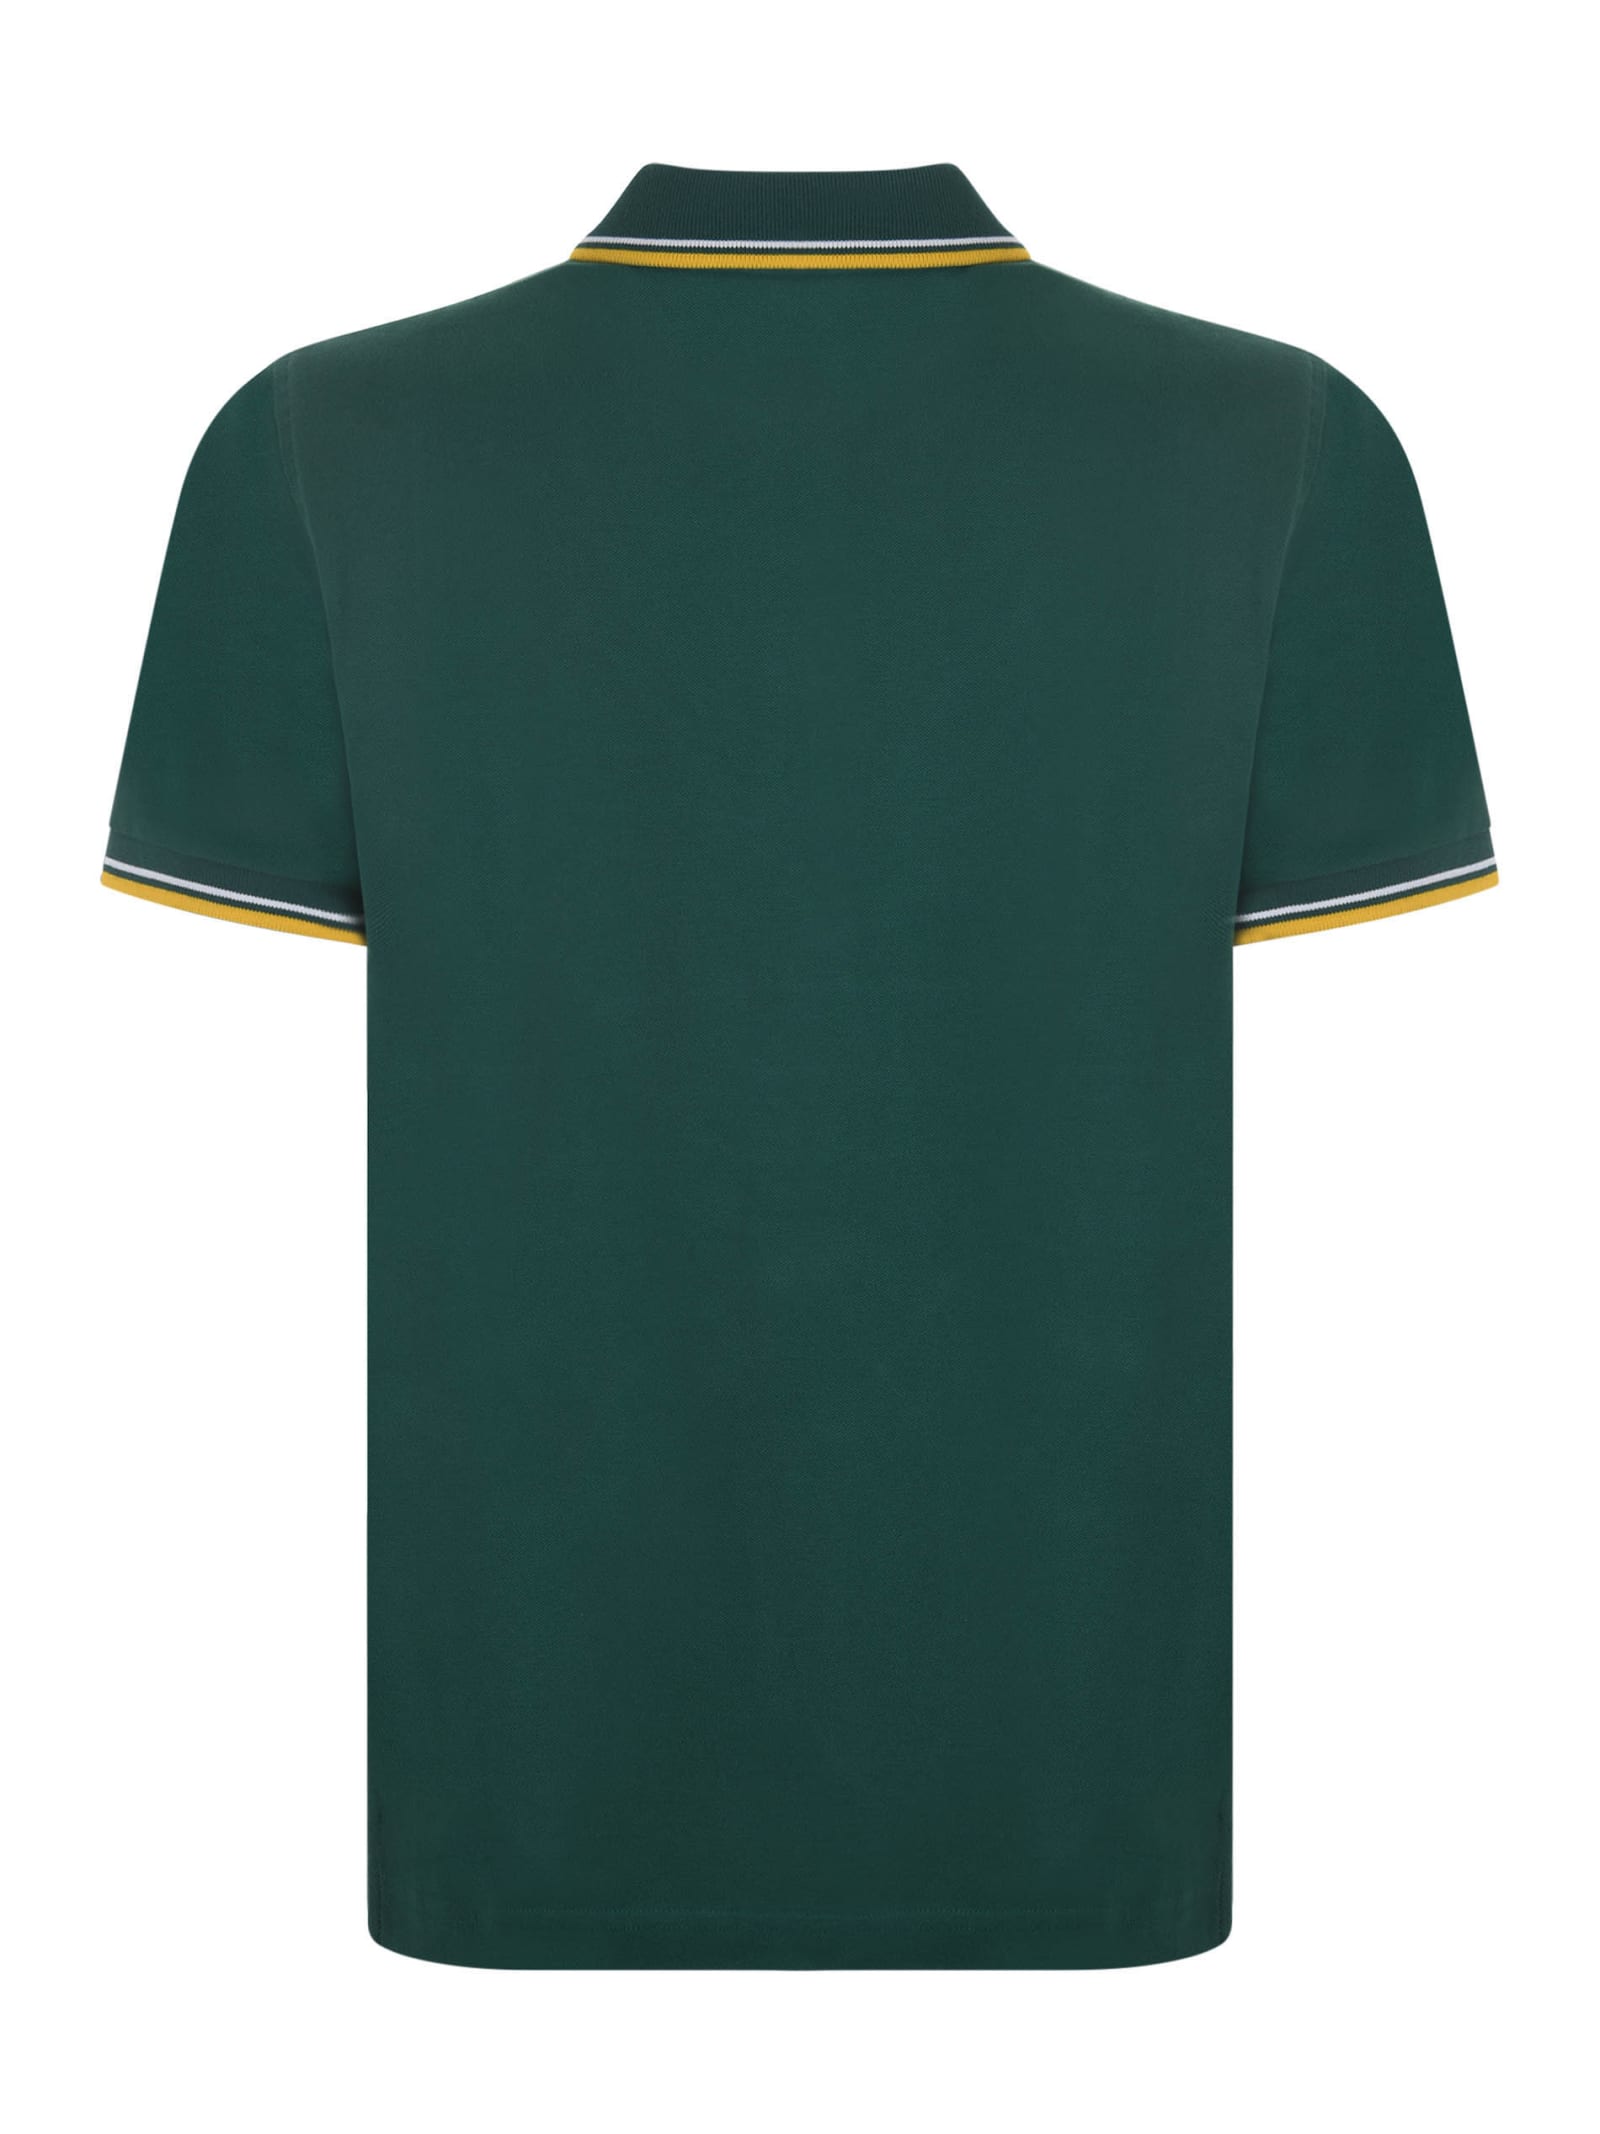 Shop Fay Polo Shirt In Verde Inglese